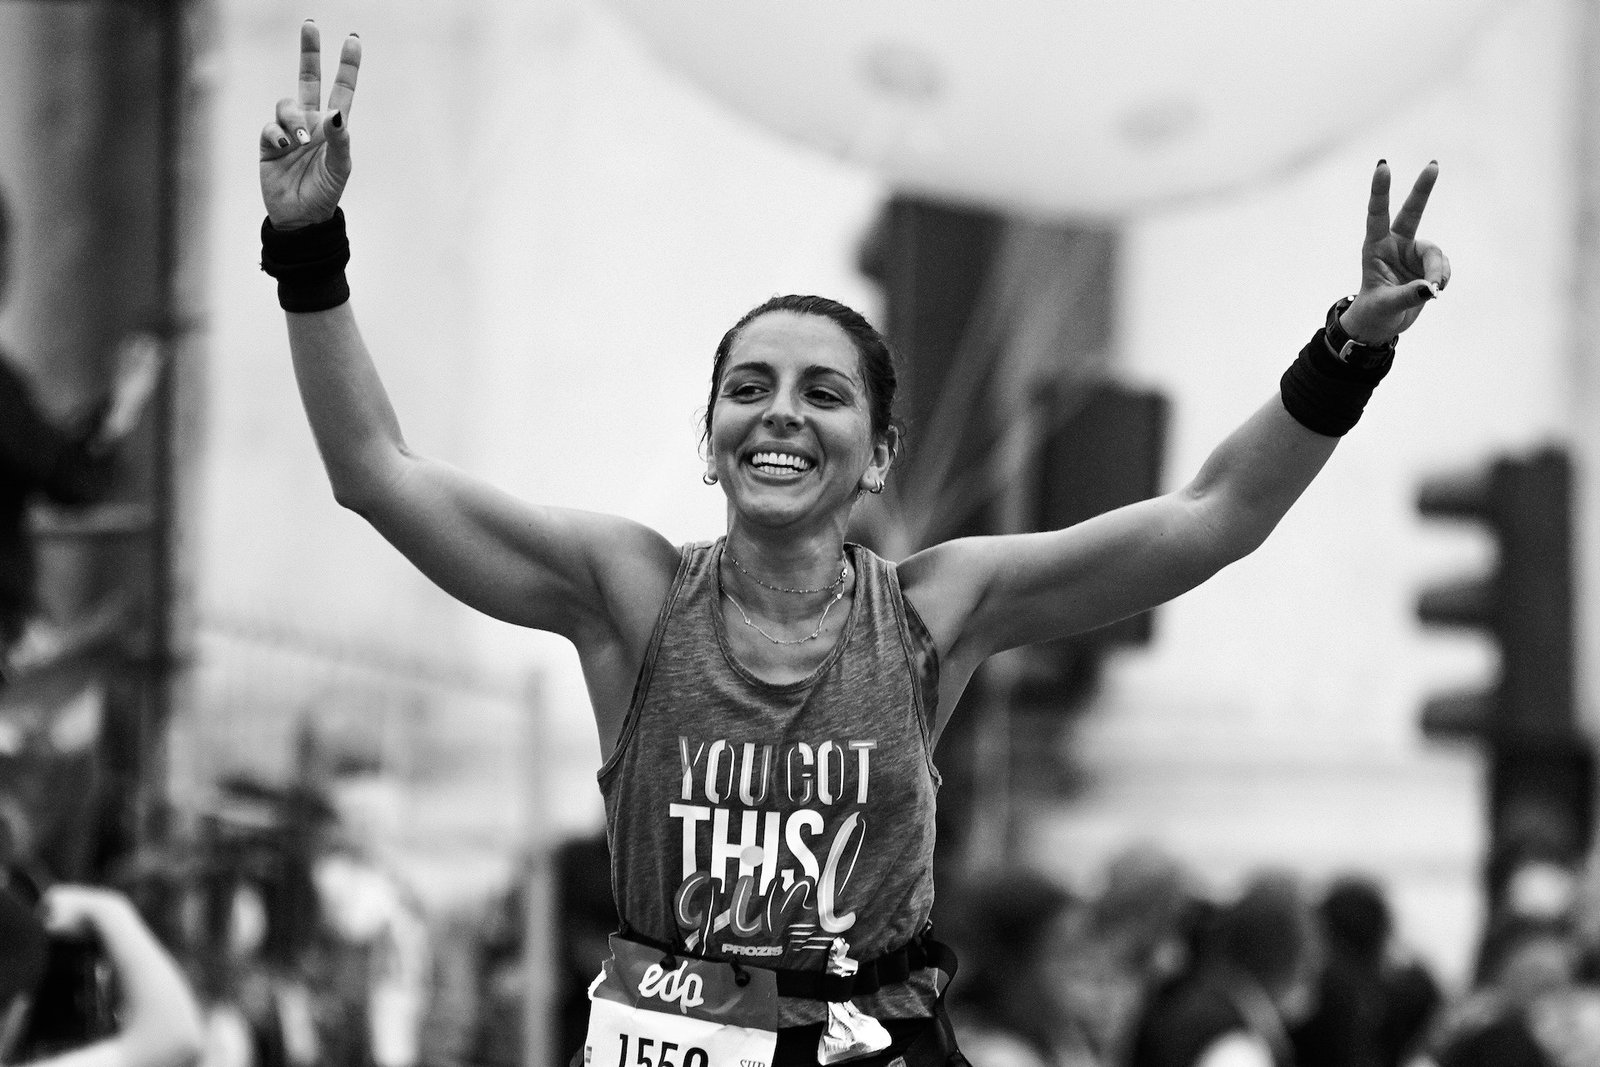 A woman prepared for her race thanks to the best marathon training plan.